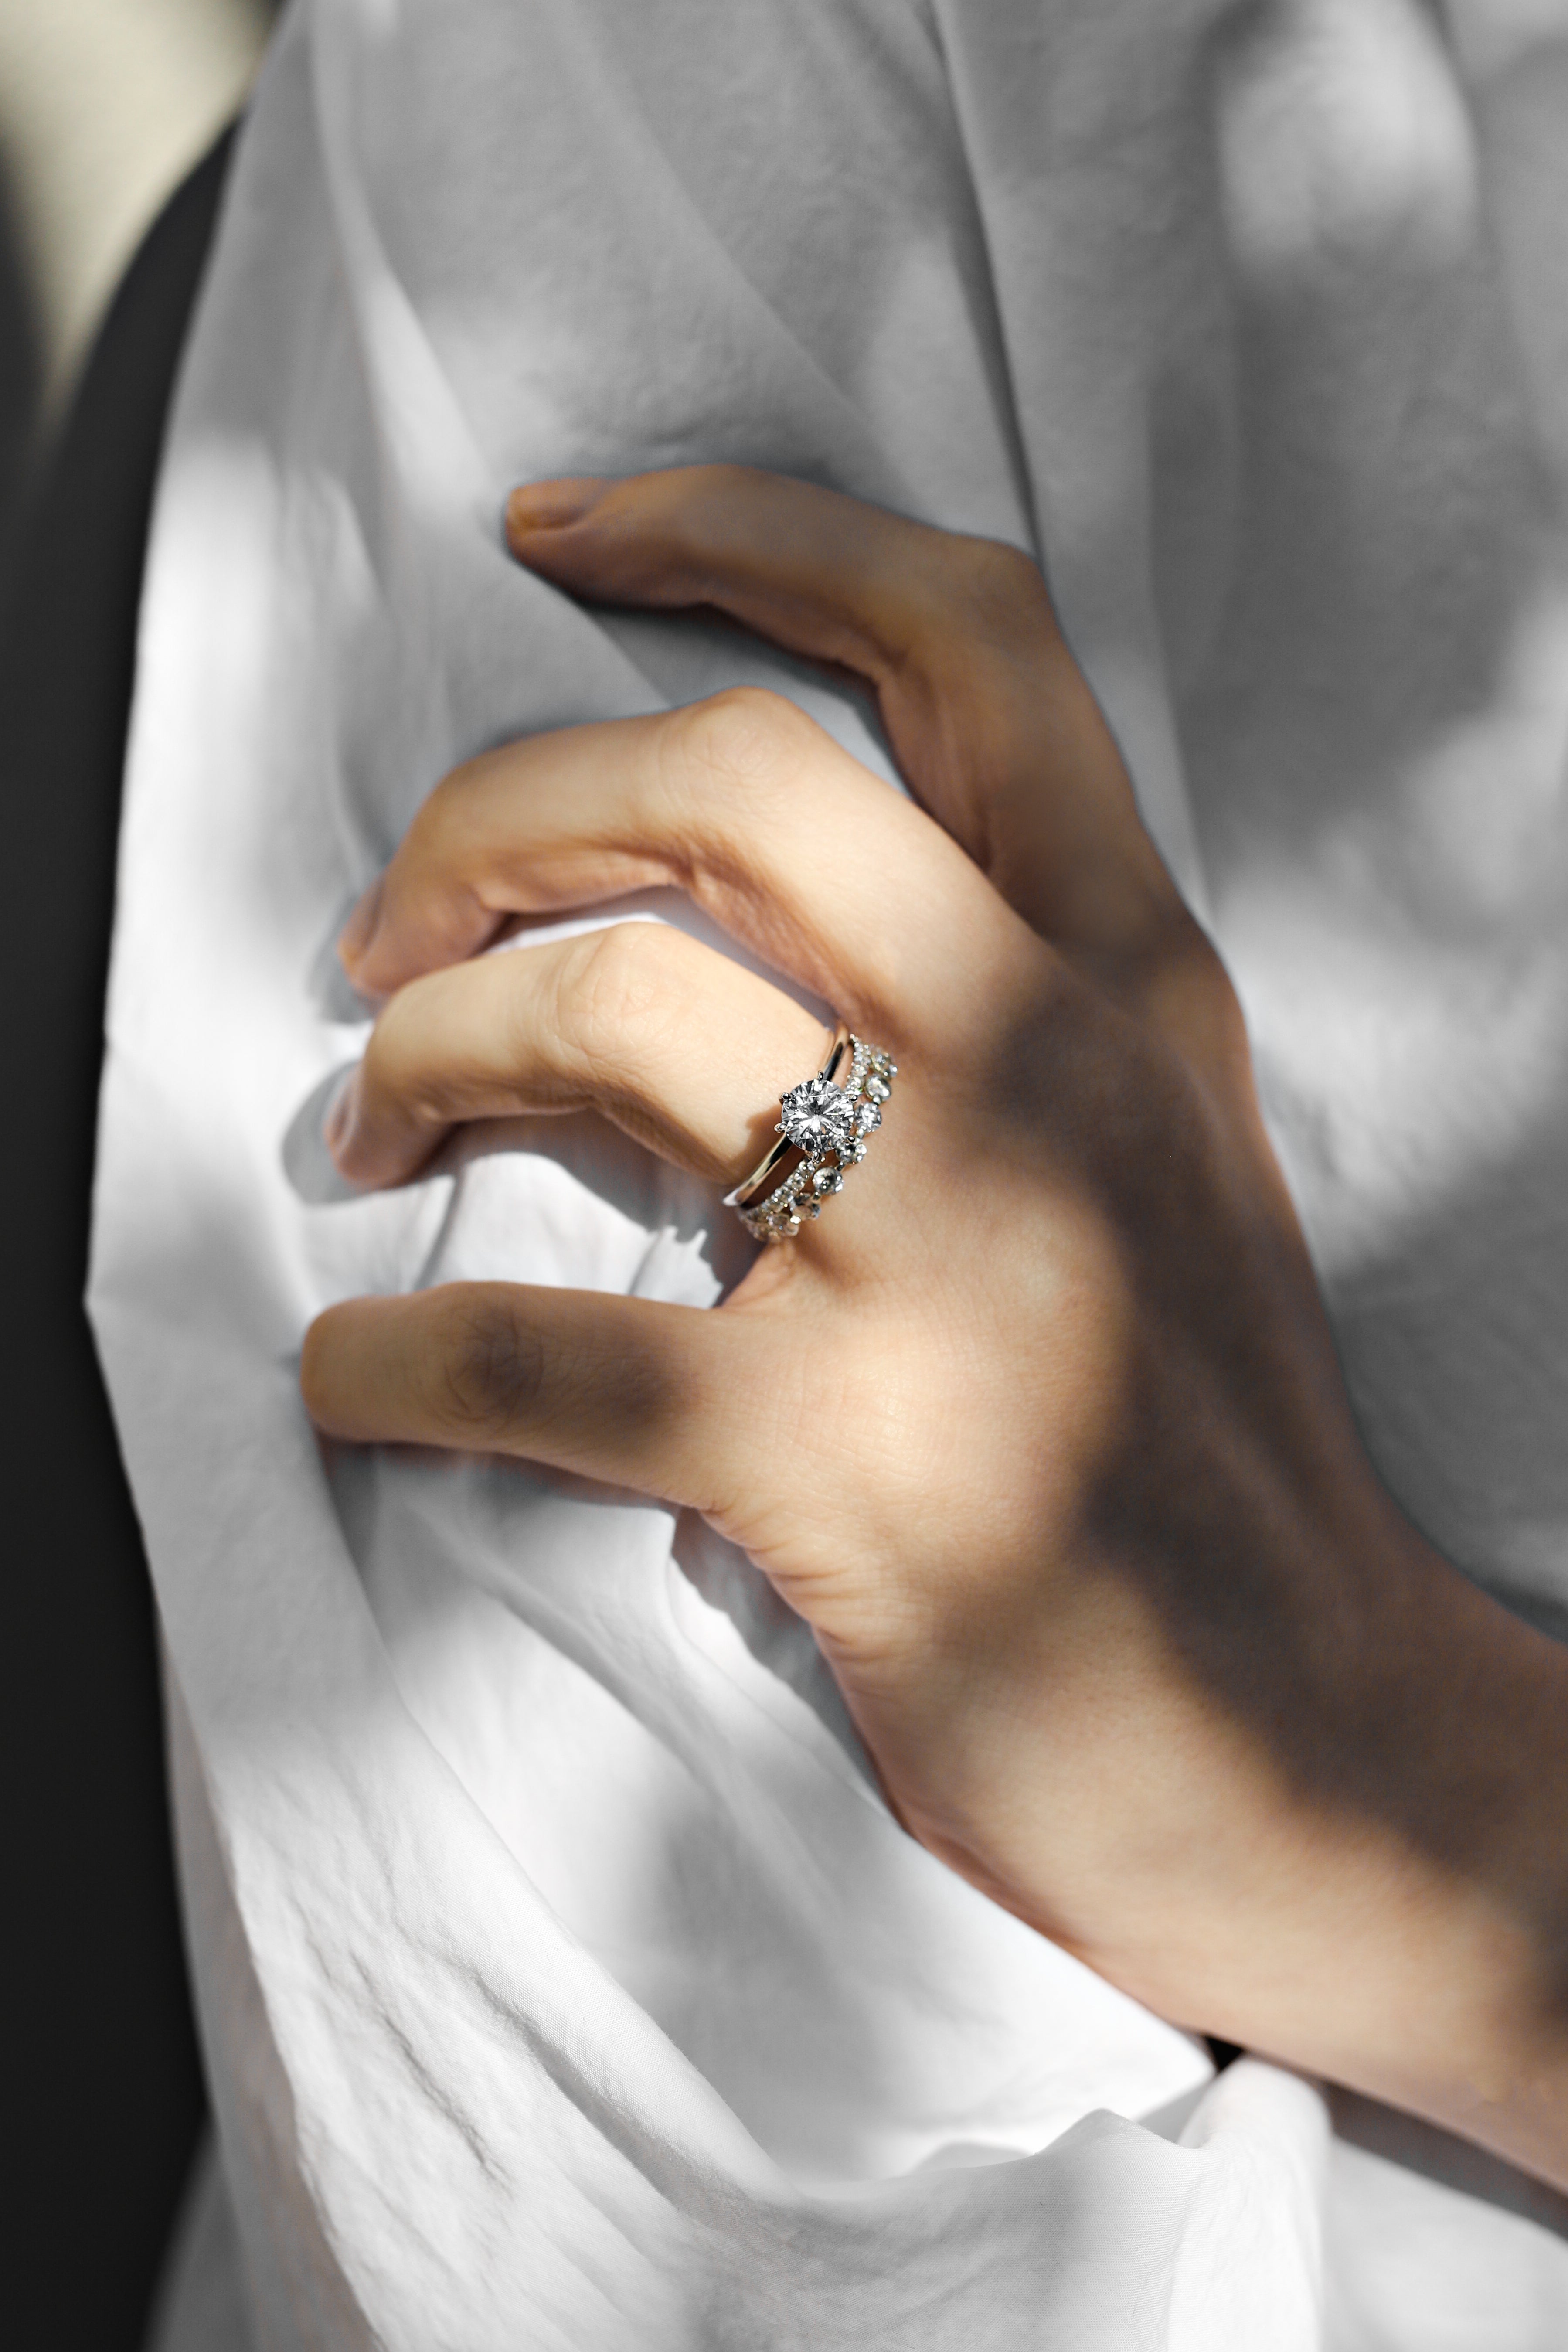 A hand showing off an engagement ring au